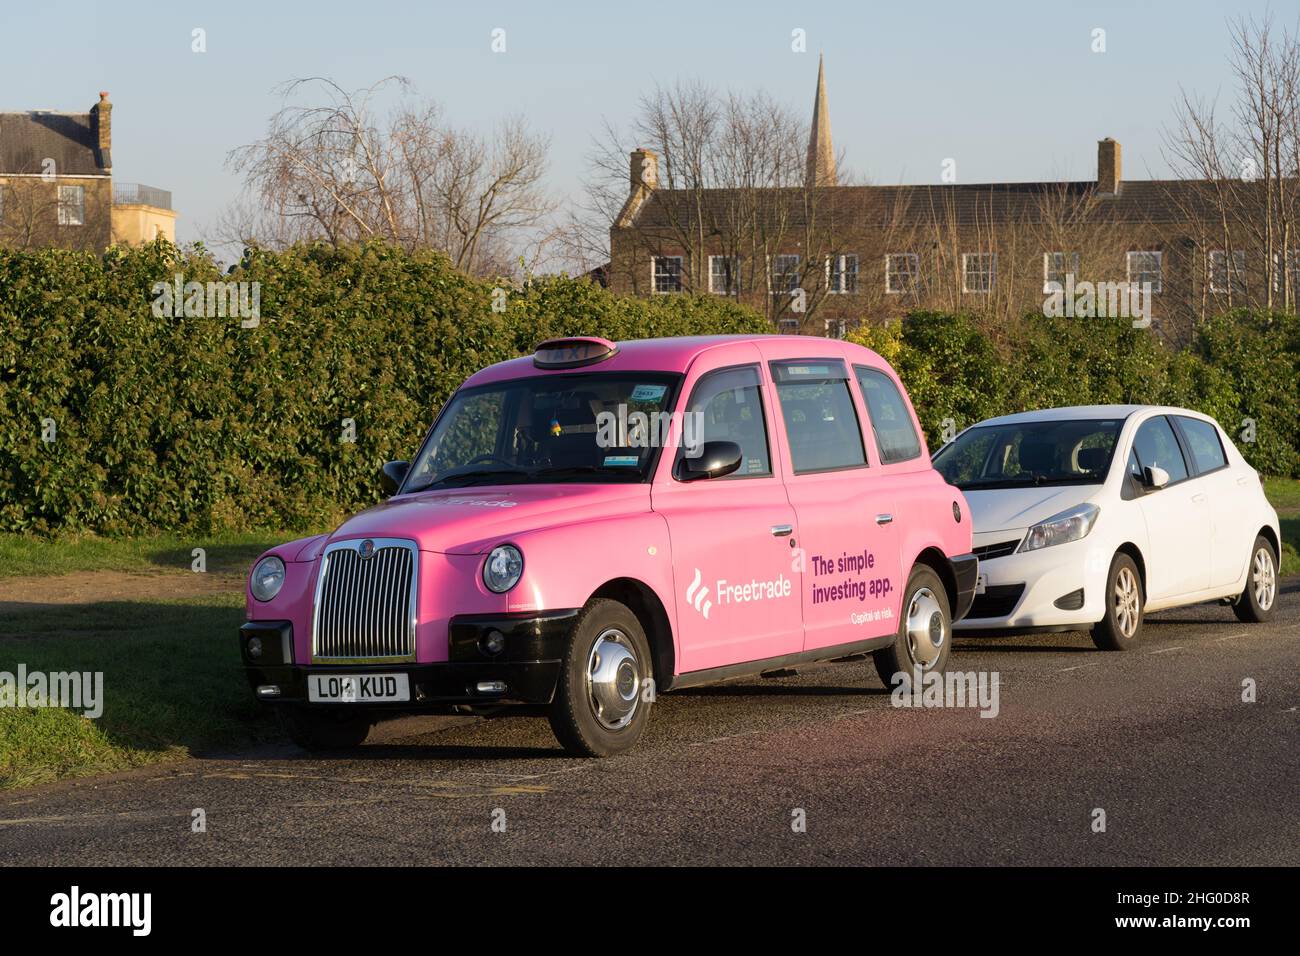 three quarter front view of London cab painted with adverting logo for Freetrade , the simple investing app, seen in Blackheath village London England Stock Photo